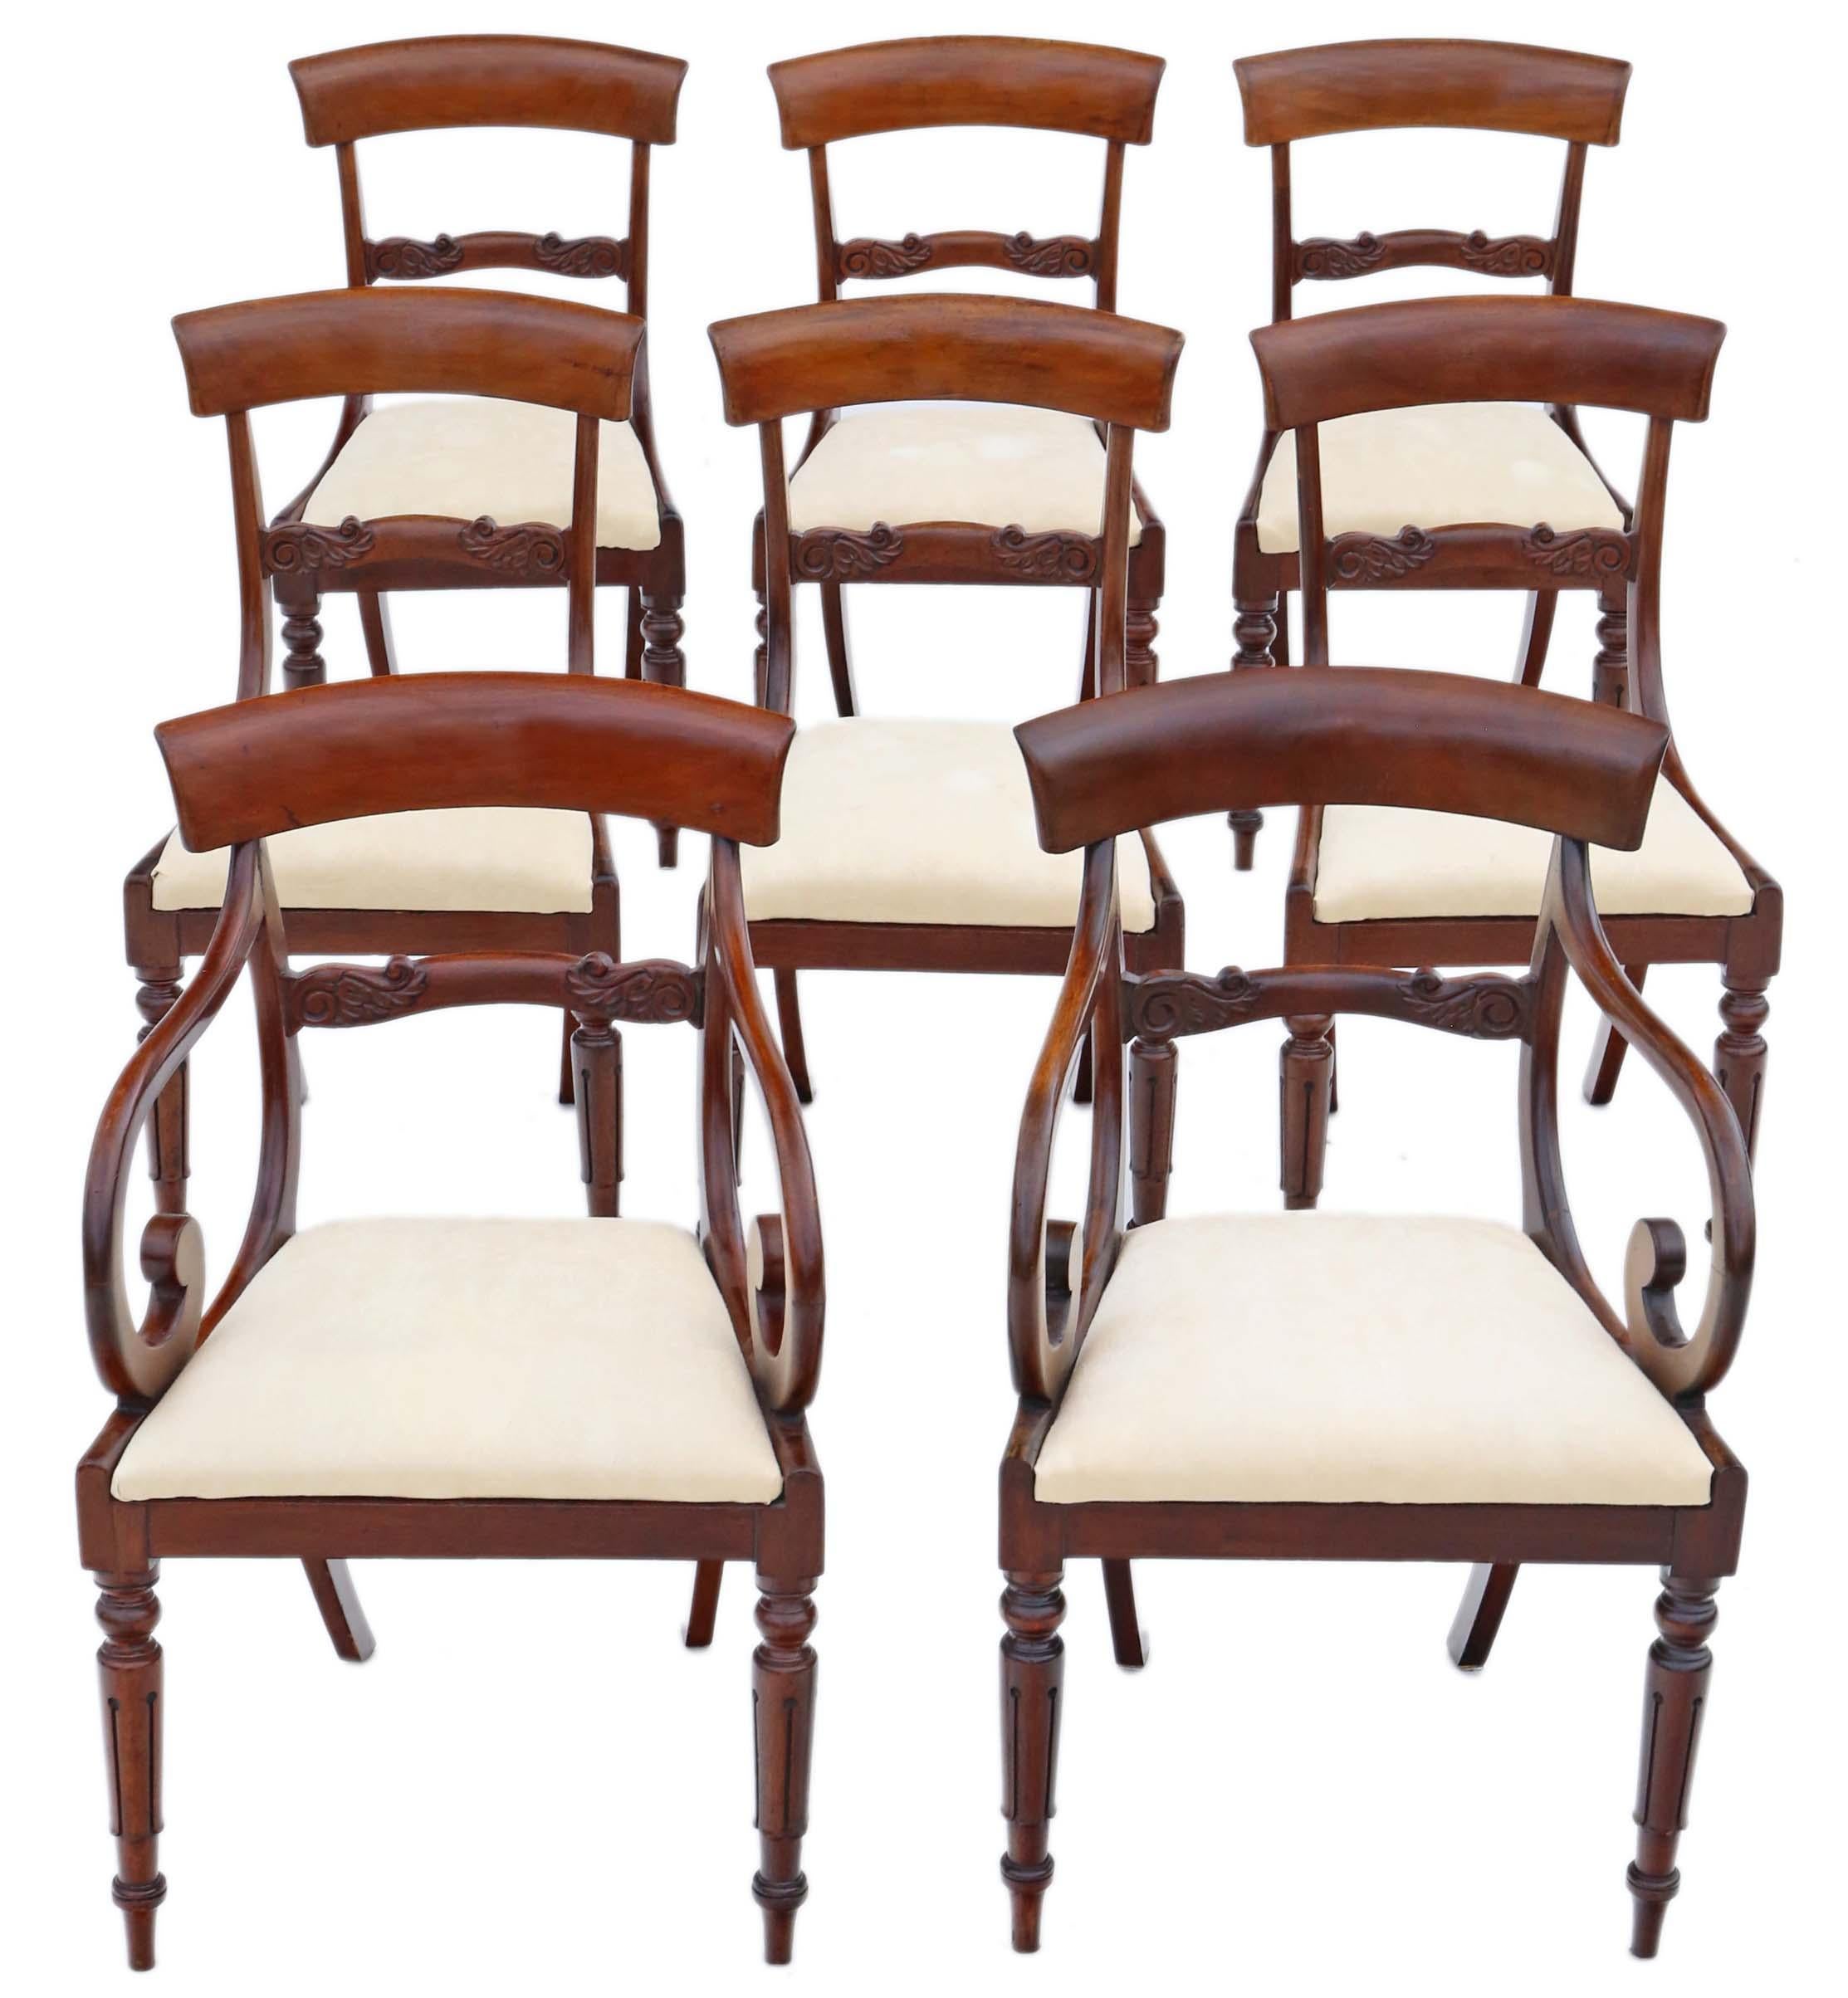 Antique fine quality set of 8 (6 plus 2) Regency / William IV mahogany dining chairs C1830. Very rare, with an elegant design!

No loose joints.

The upholstery is not new and has light wear and minor marks. We could organise professionally